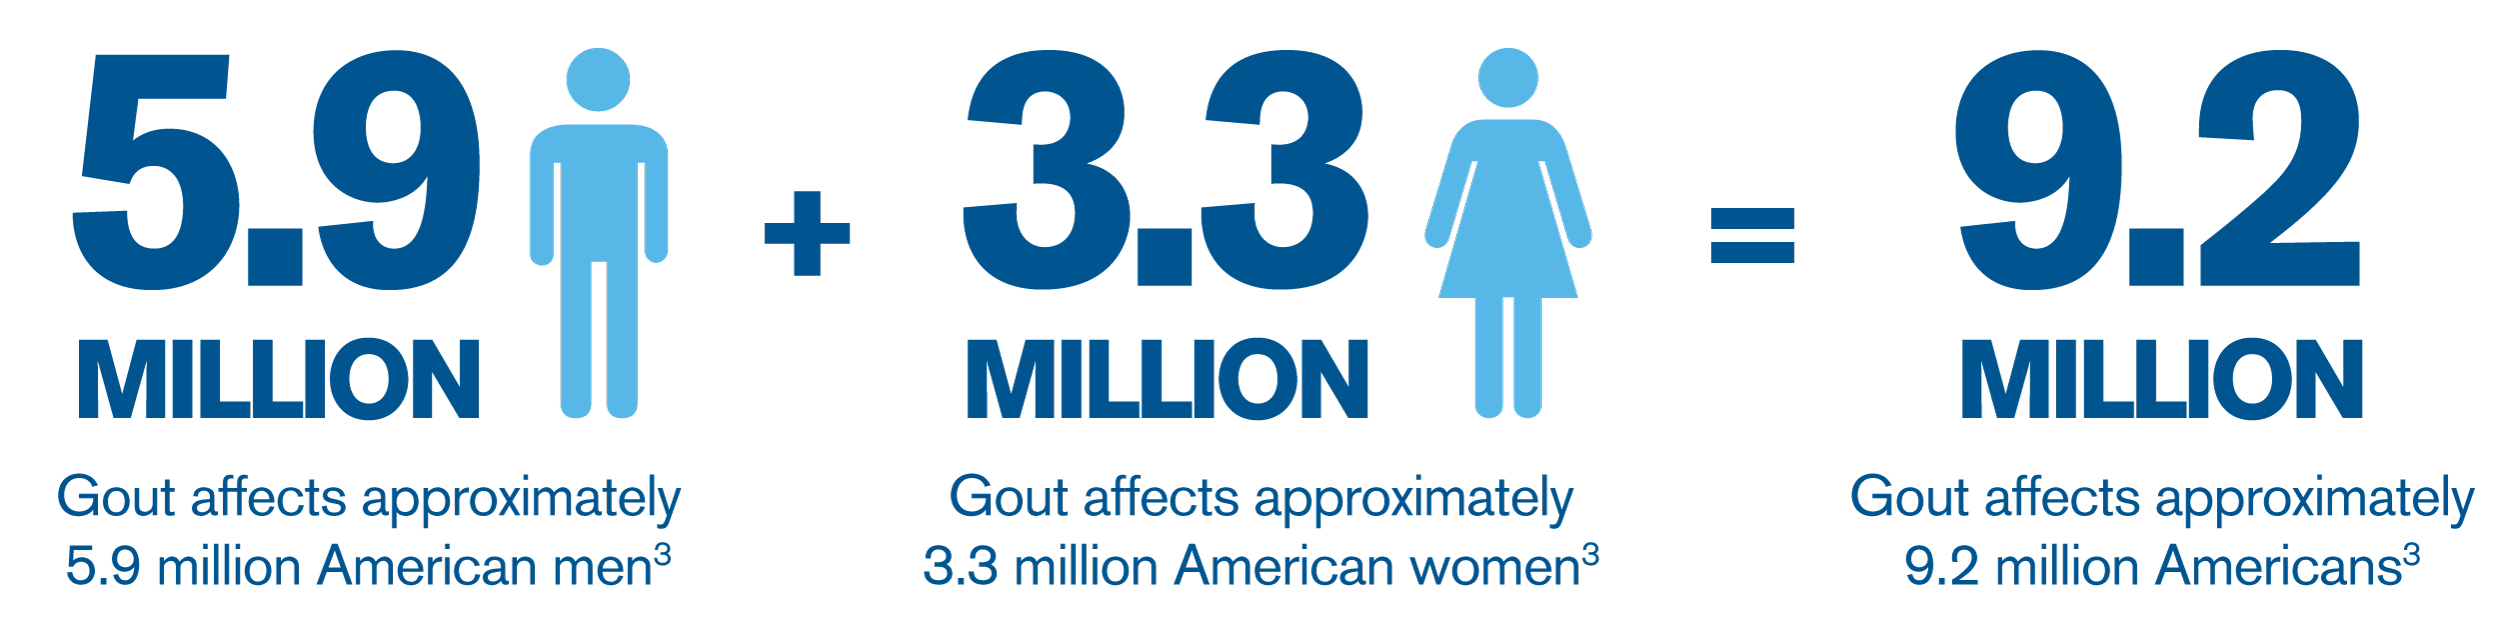 Gout Patient Profiles: Although the majority of people who suffer with gout are men, many women are affected by the disease.